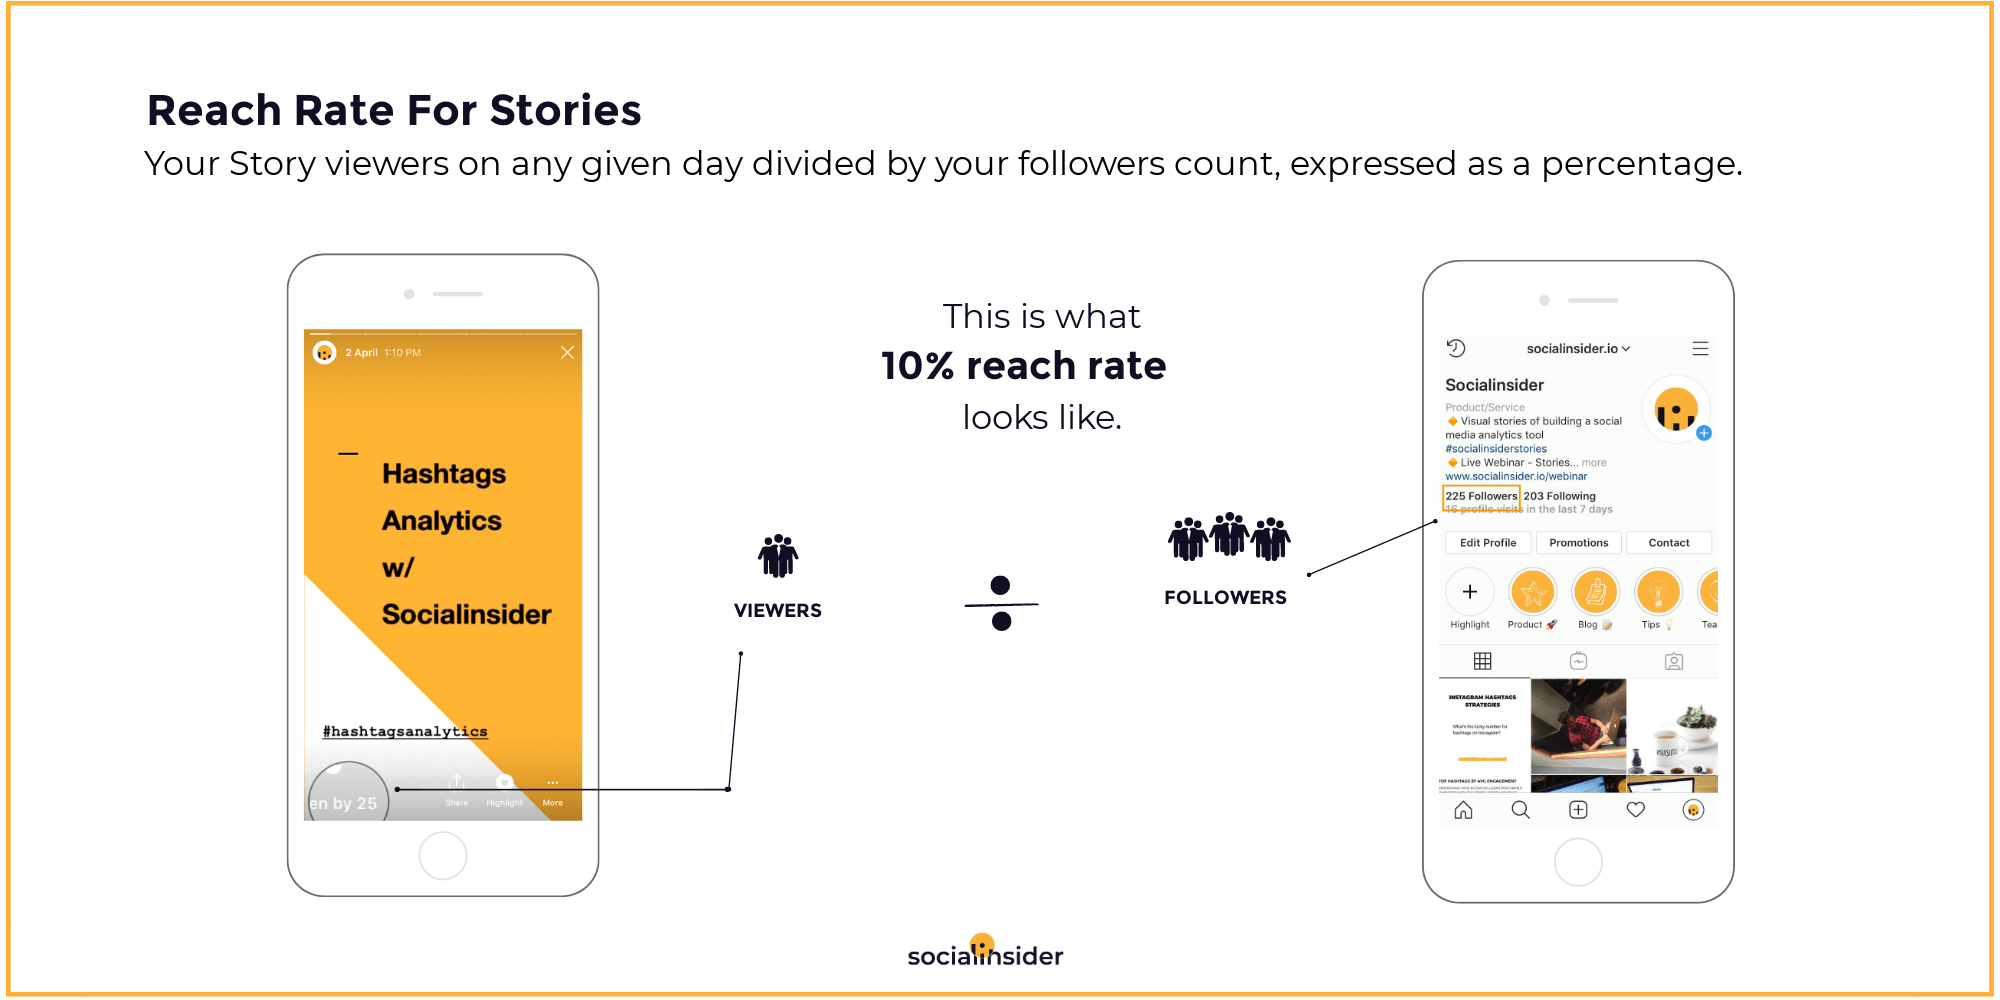 Here's how reach rate is computed in Stories